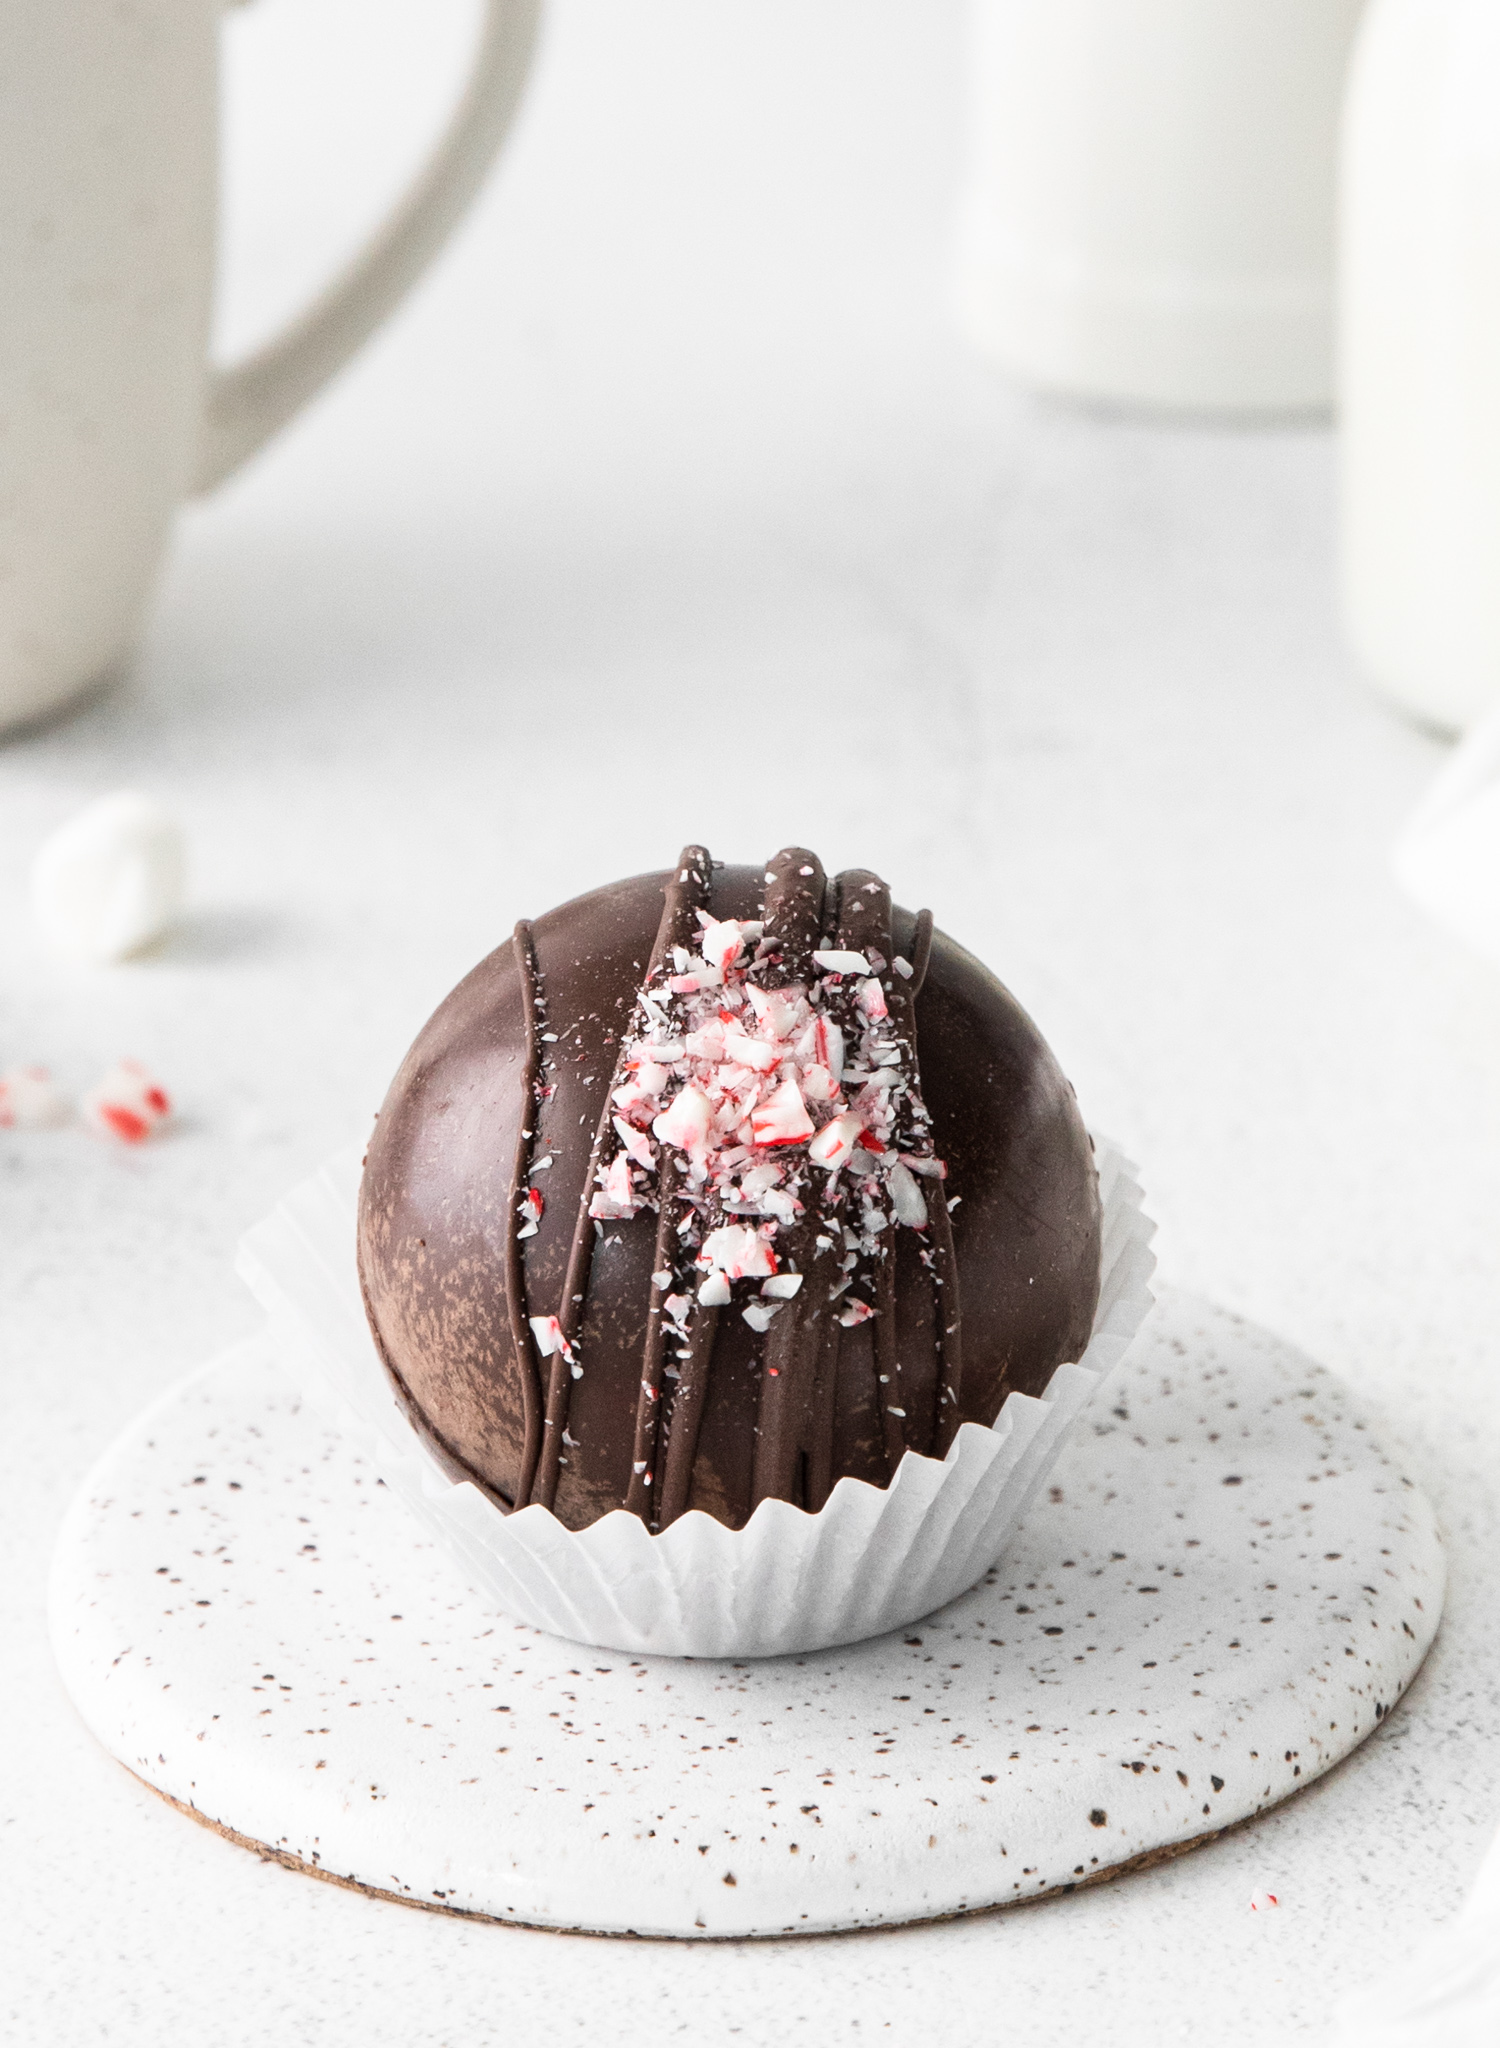 How to Make HOT CHOCOLATE BOMBS + PACKAGING EASY Hot Cocoa Bomb